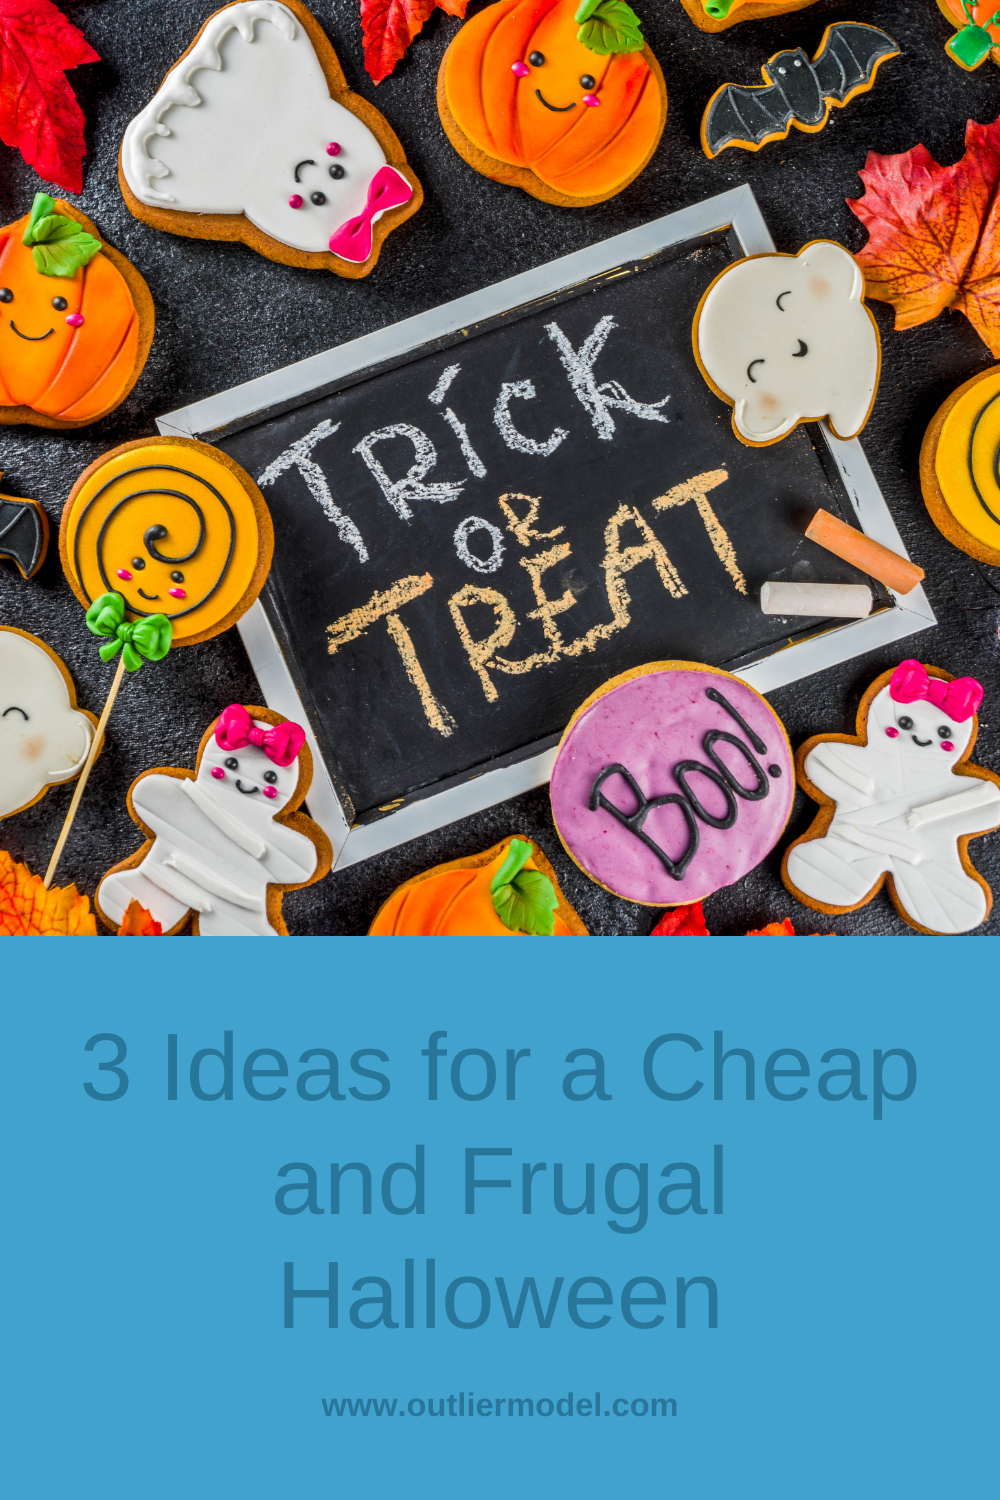 3 Ideas for a Cheap and Frugal Halloween